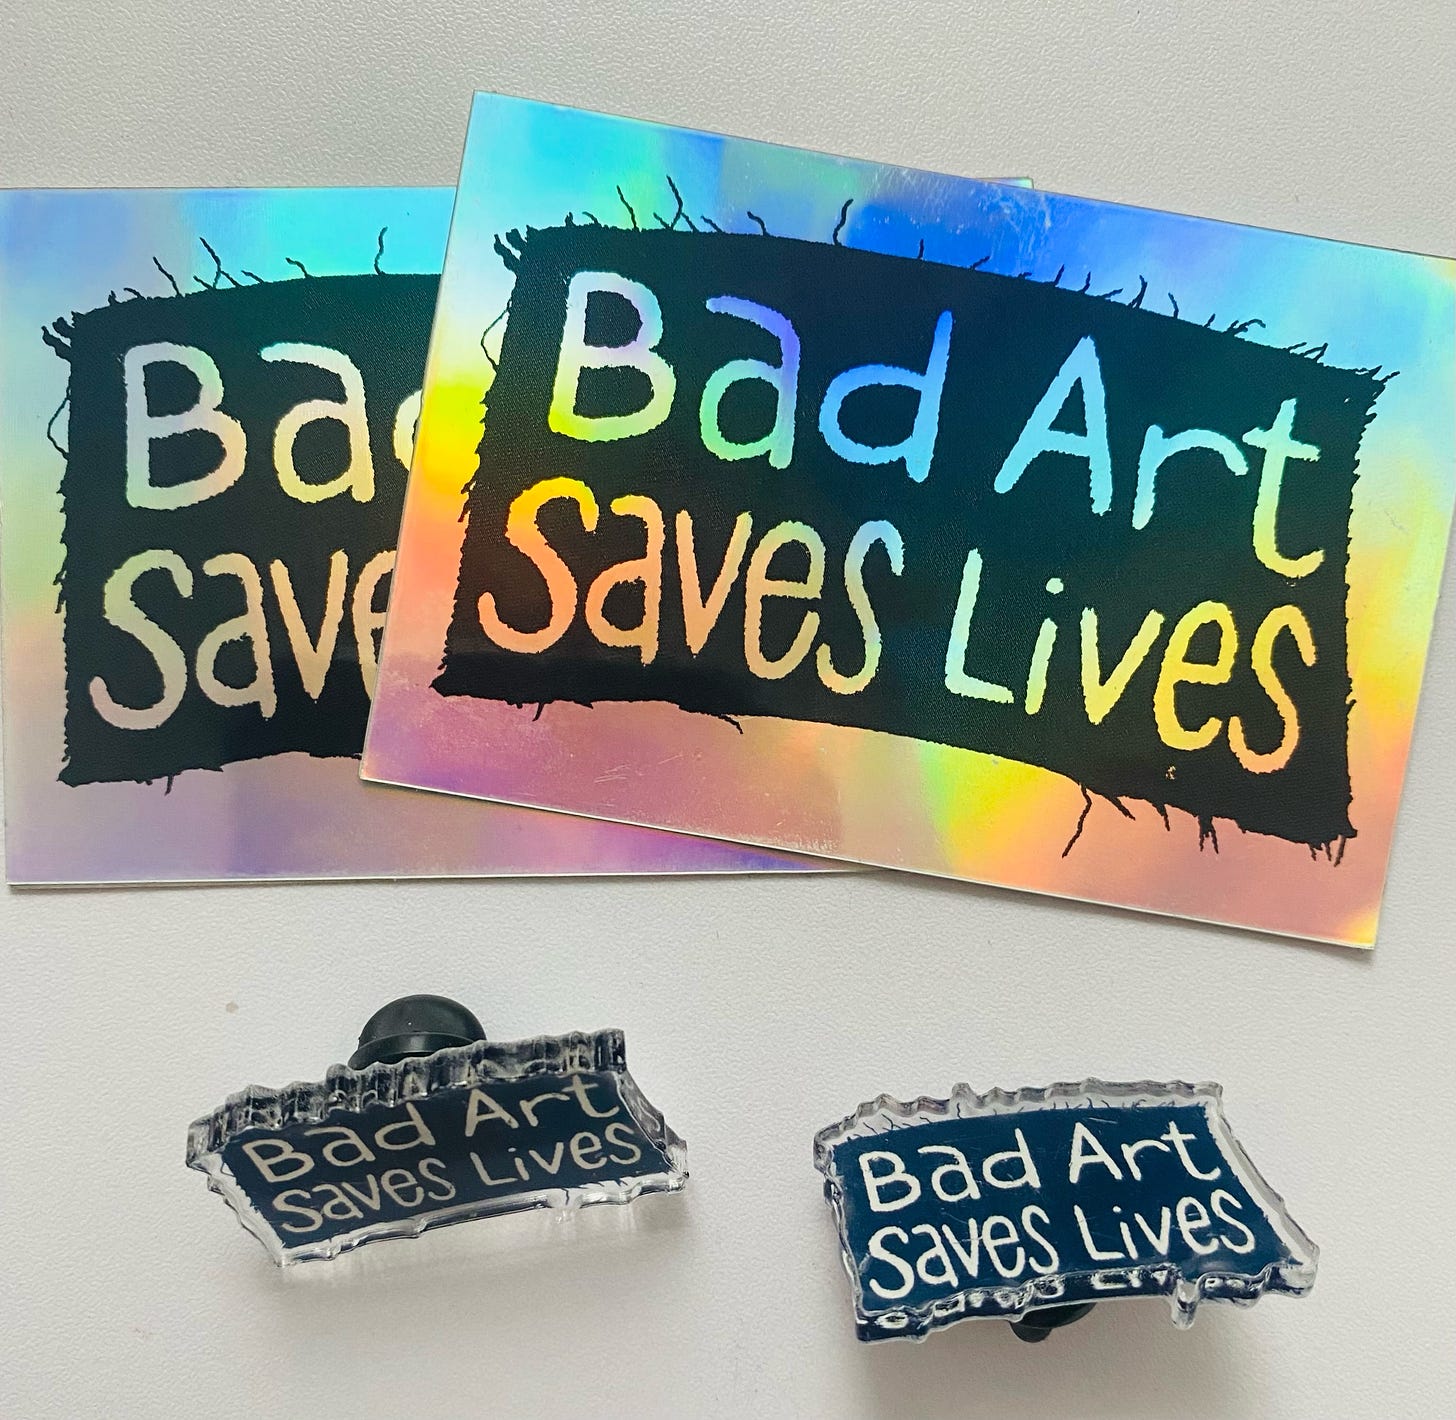 An image of two holographic "bad art saves lives" stickers and two black "bad art saves lives" pins.